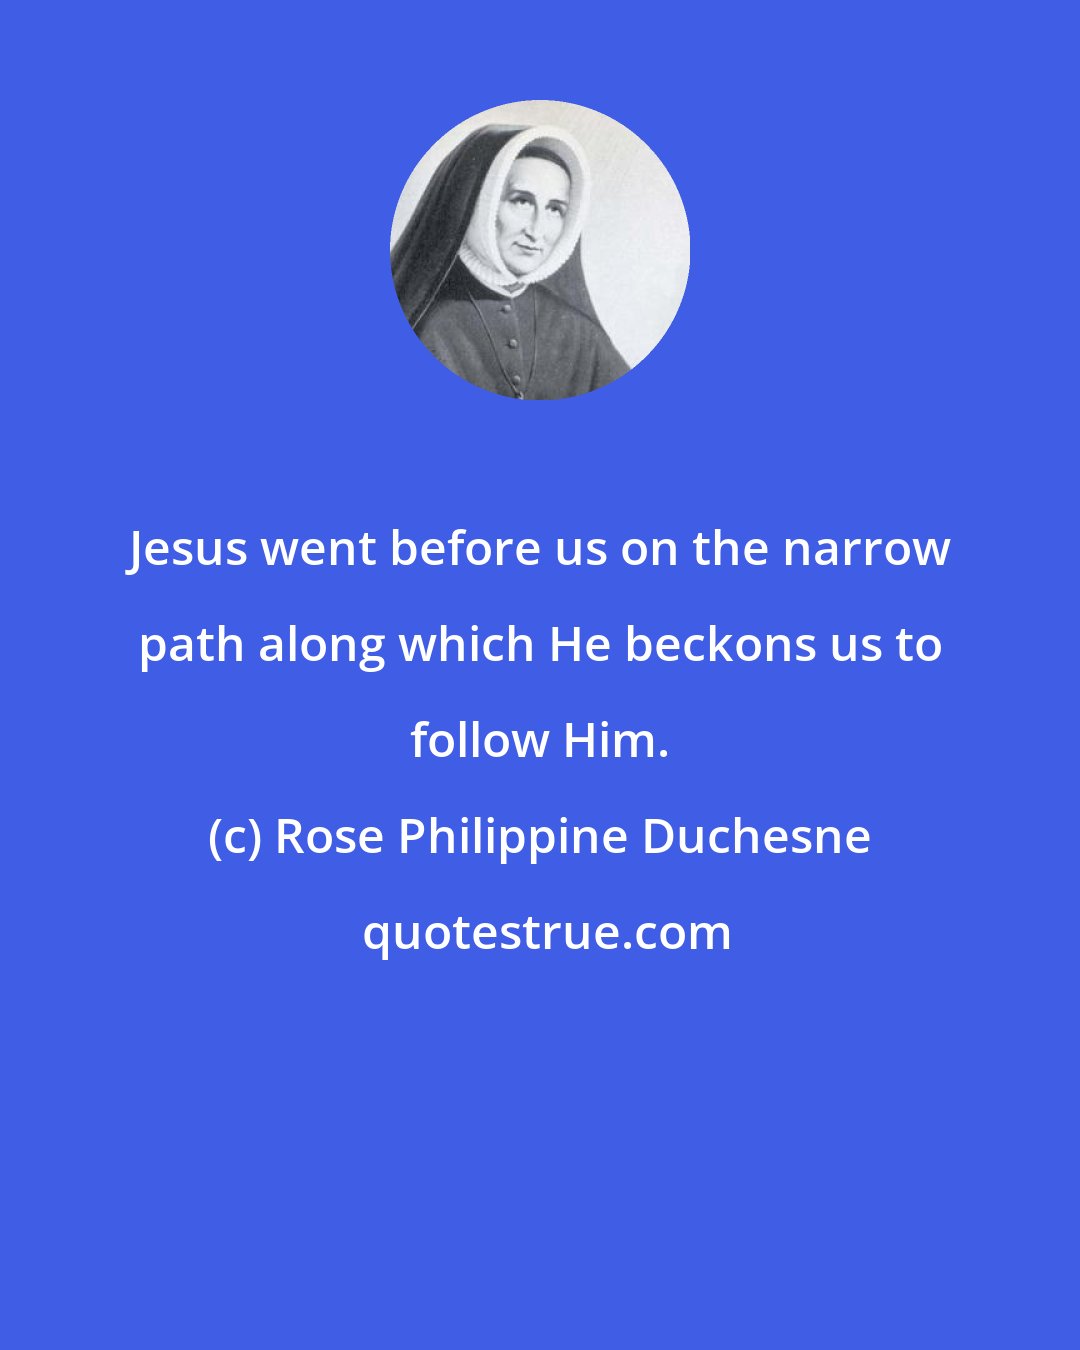 Rose Philippine Duchesne: Jesus went before us on the narrow path along which He beckons us to follow Him.